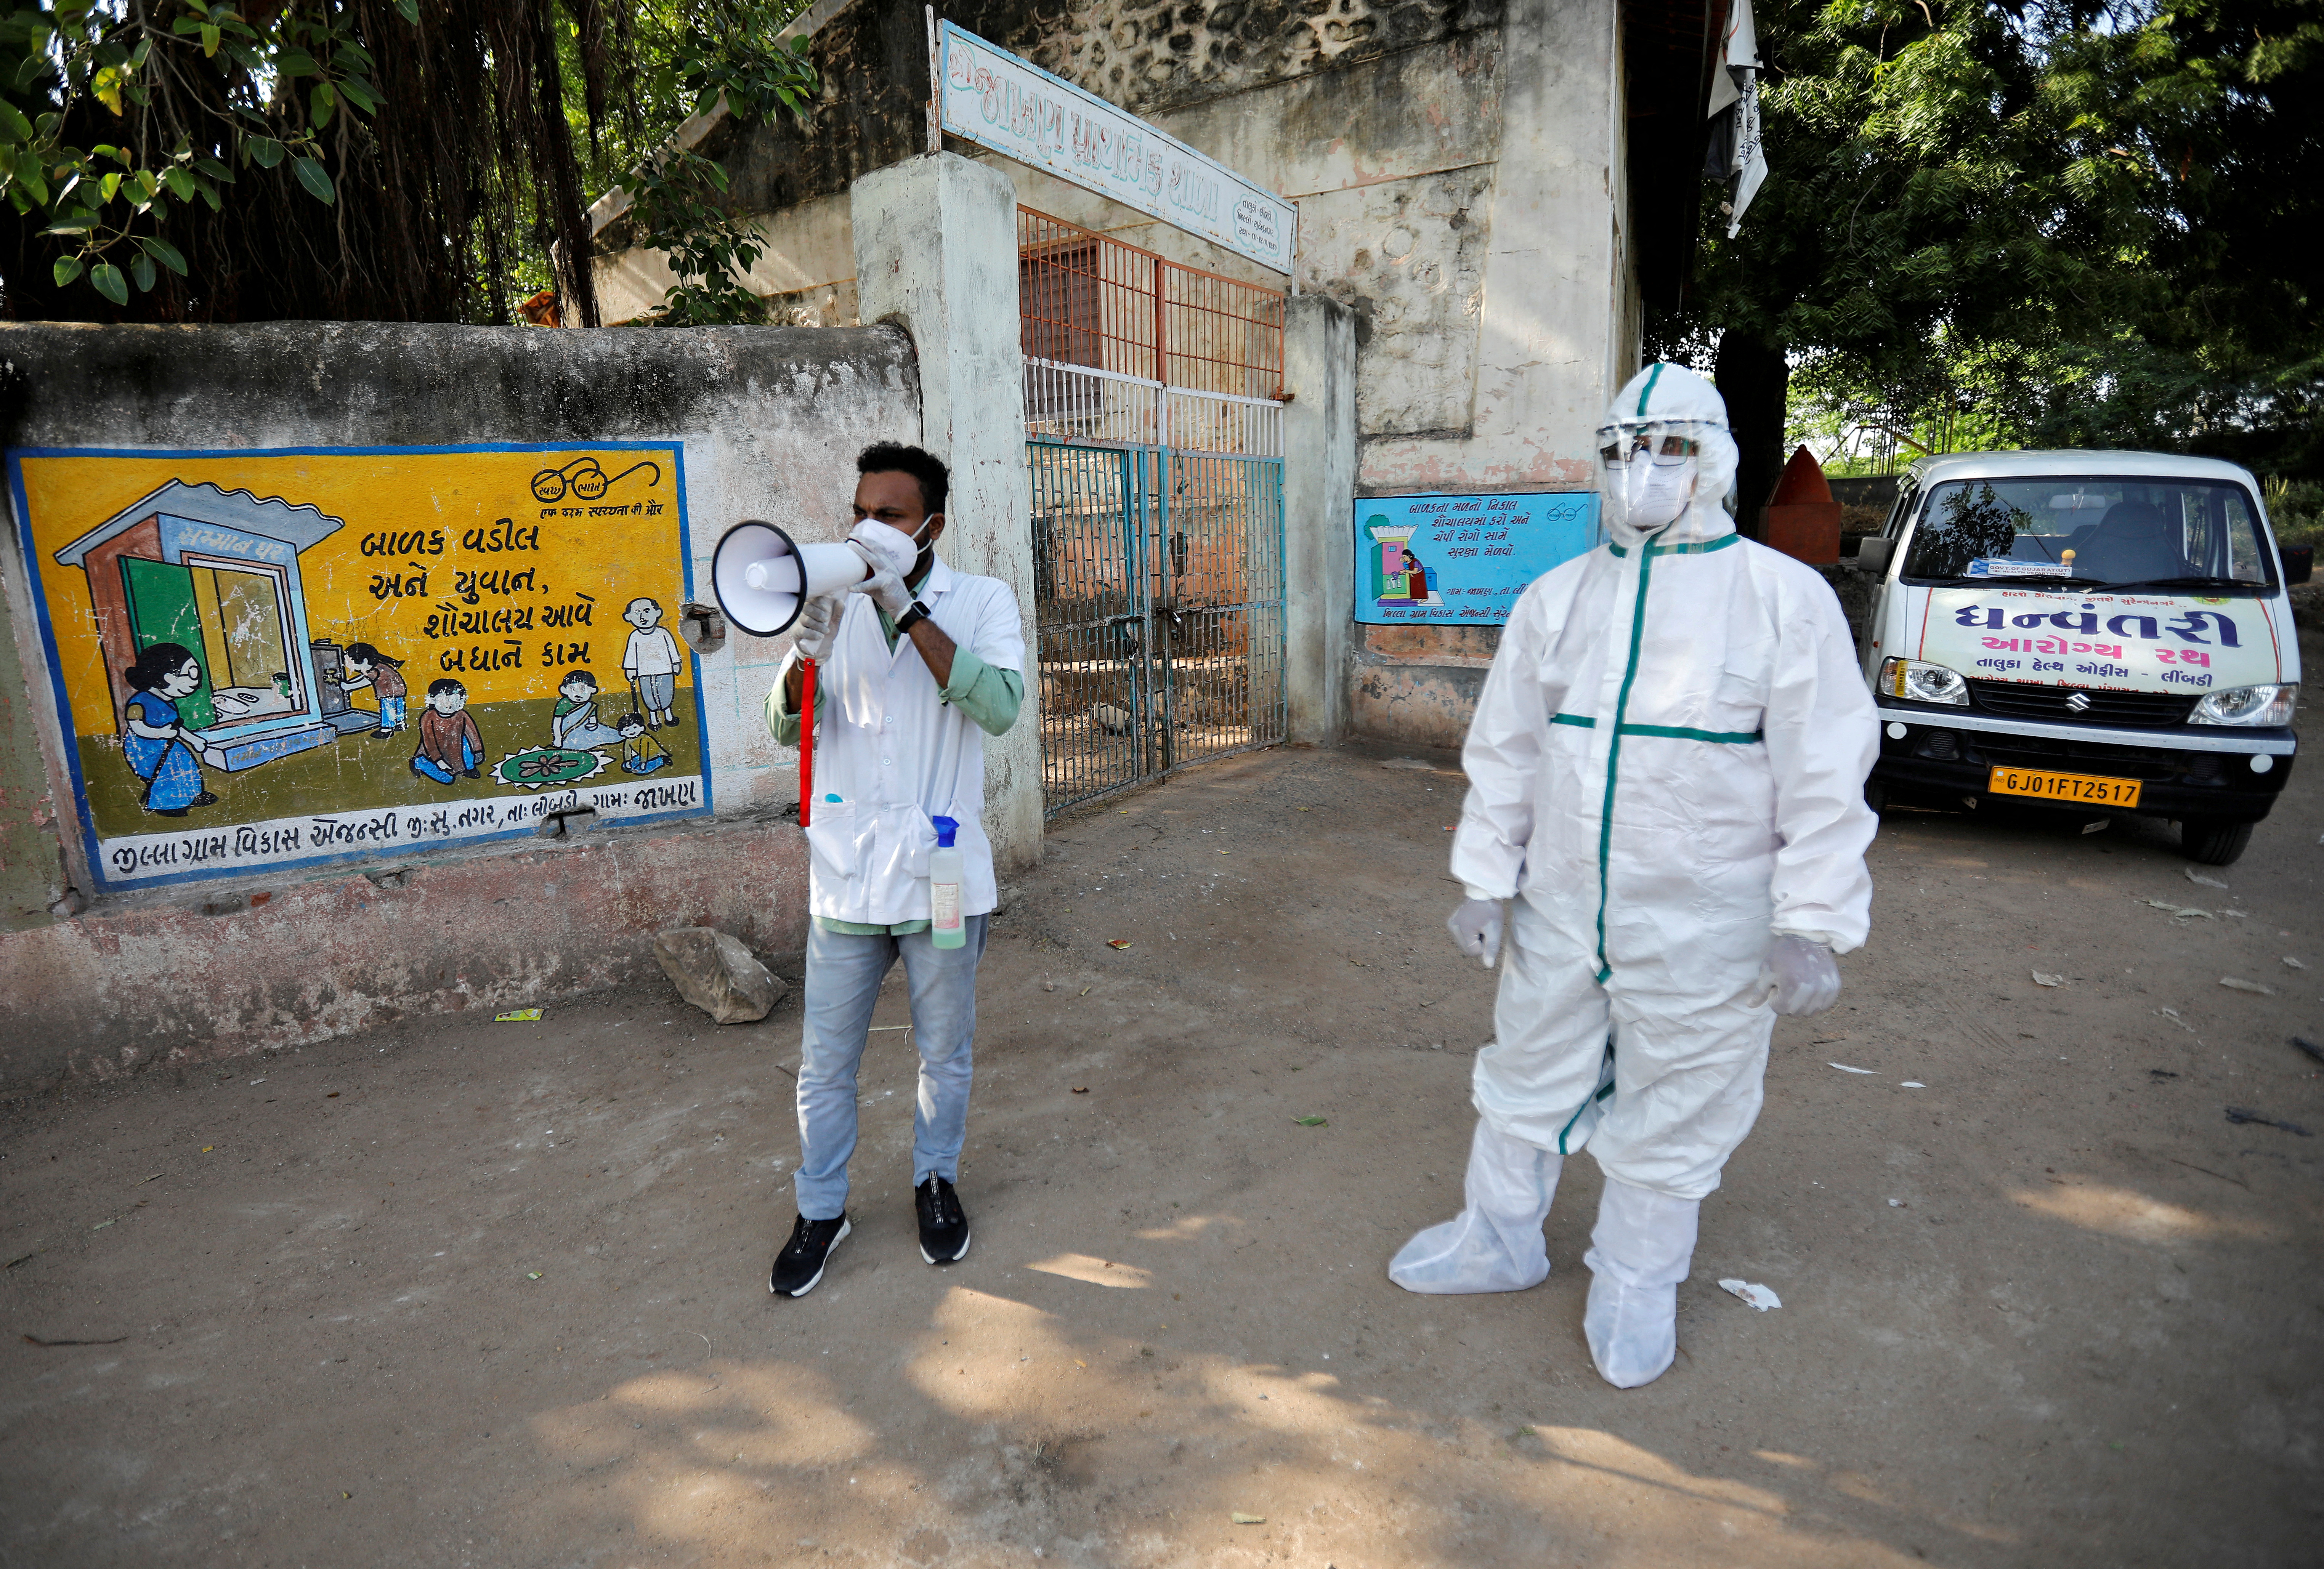 A healthcare worker announces to people to get their rapid antigen tests done during a door-to-door survey for the coronavirus disease (COVID-19), in Jakhan village in the western state of Gujarat, India, September 22, 2020. REUTERS/Amit Dave/File Photo